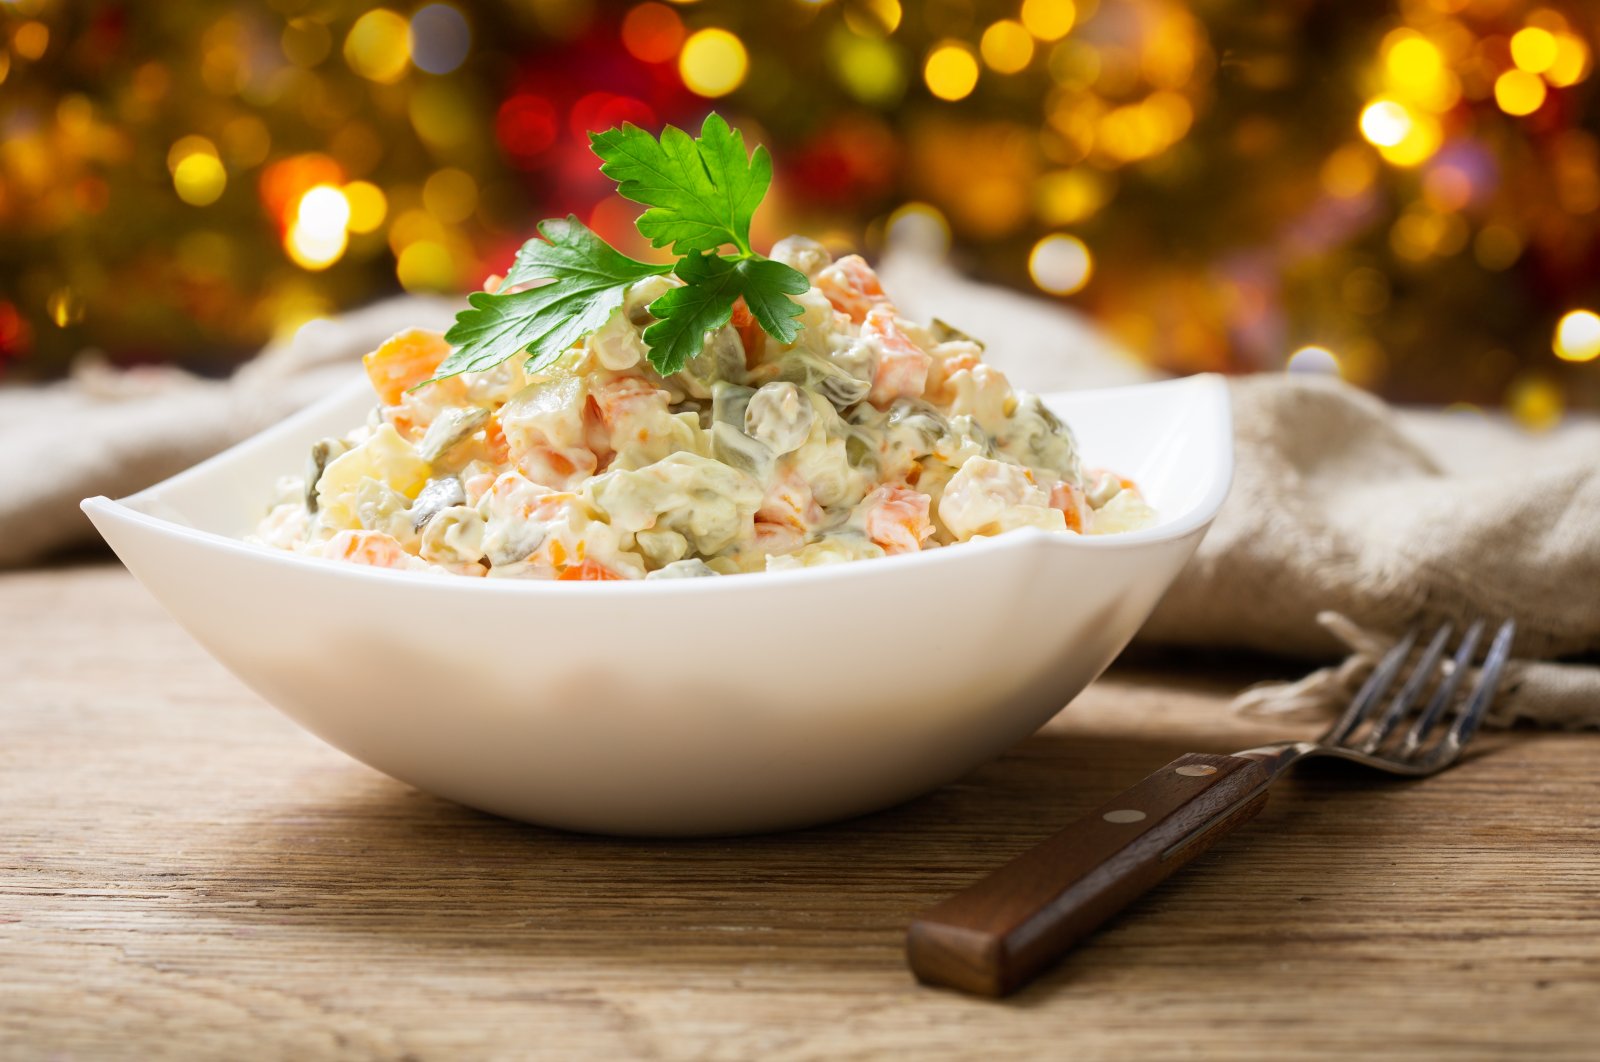 A bowl of russian salad is seen on a wooden table (Shutterstock)